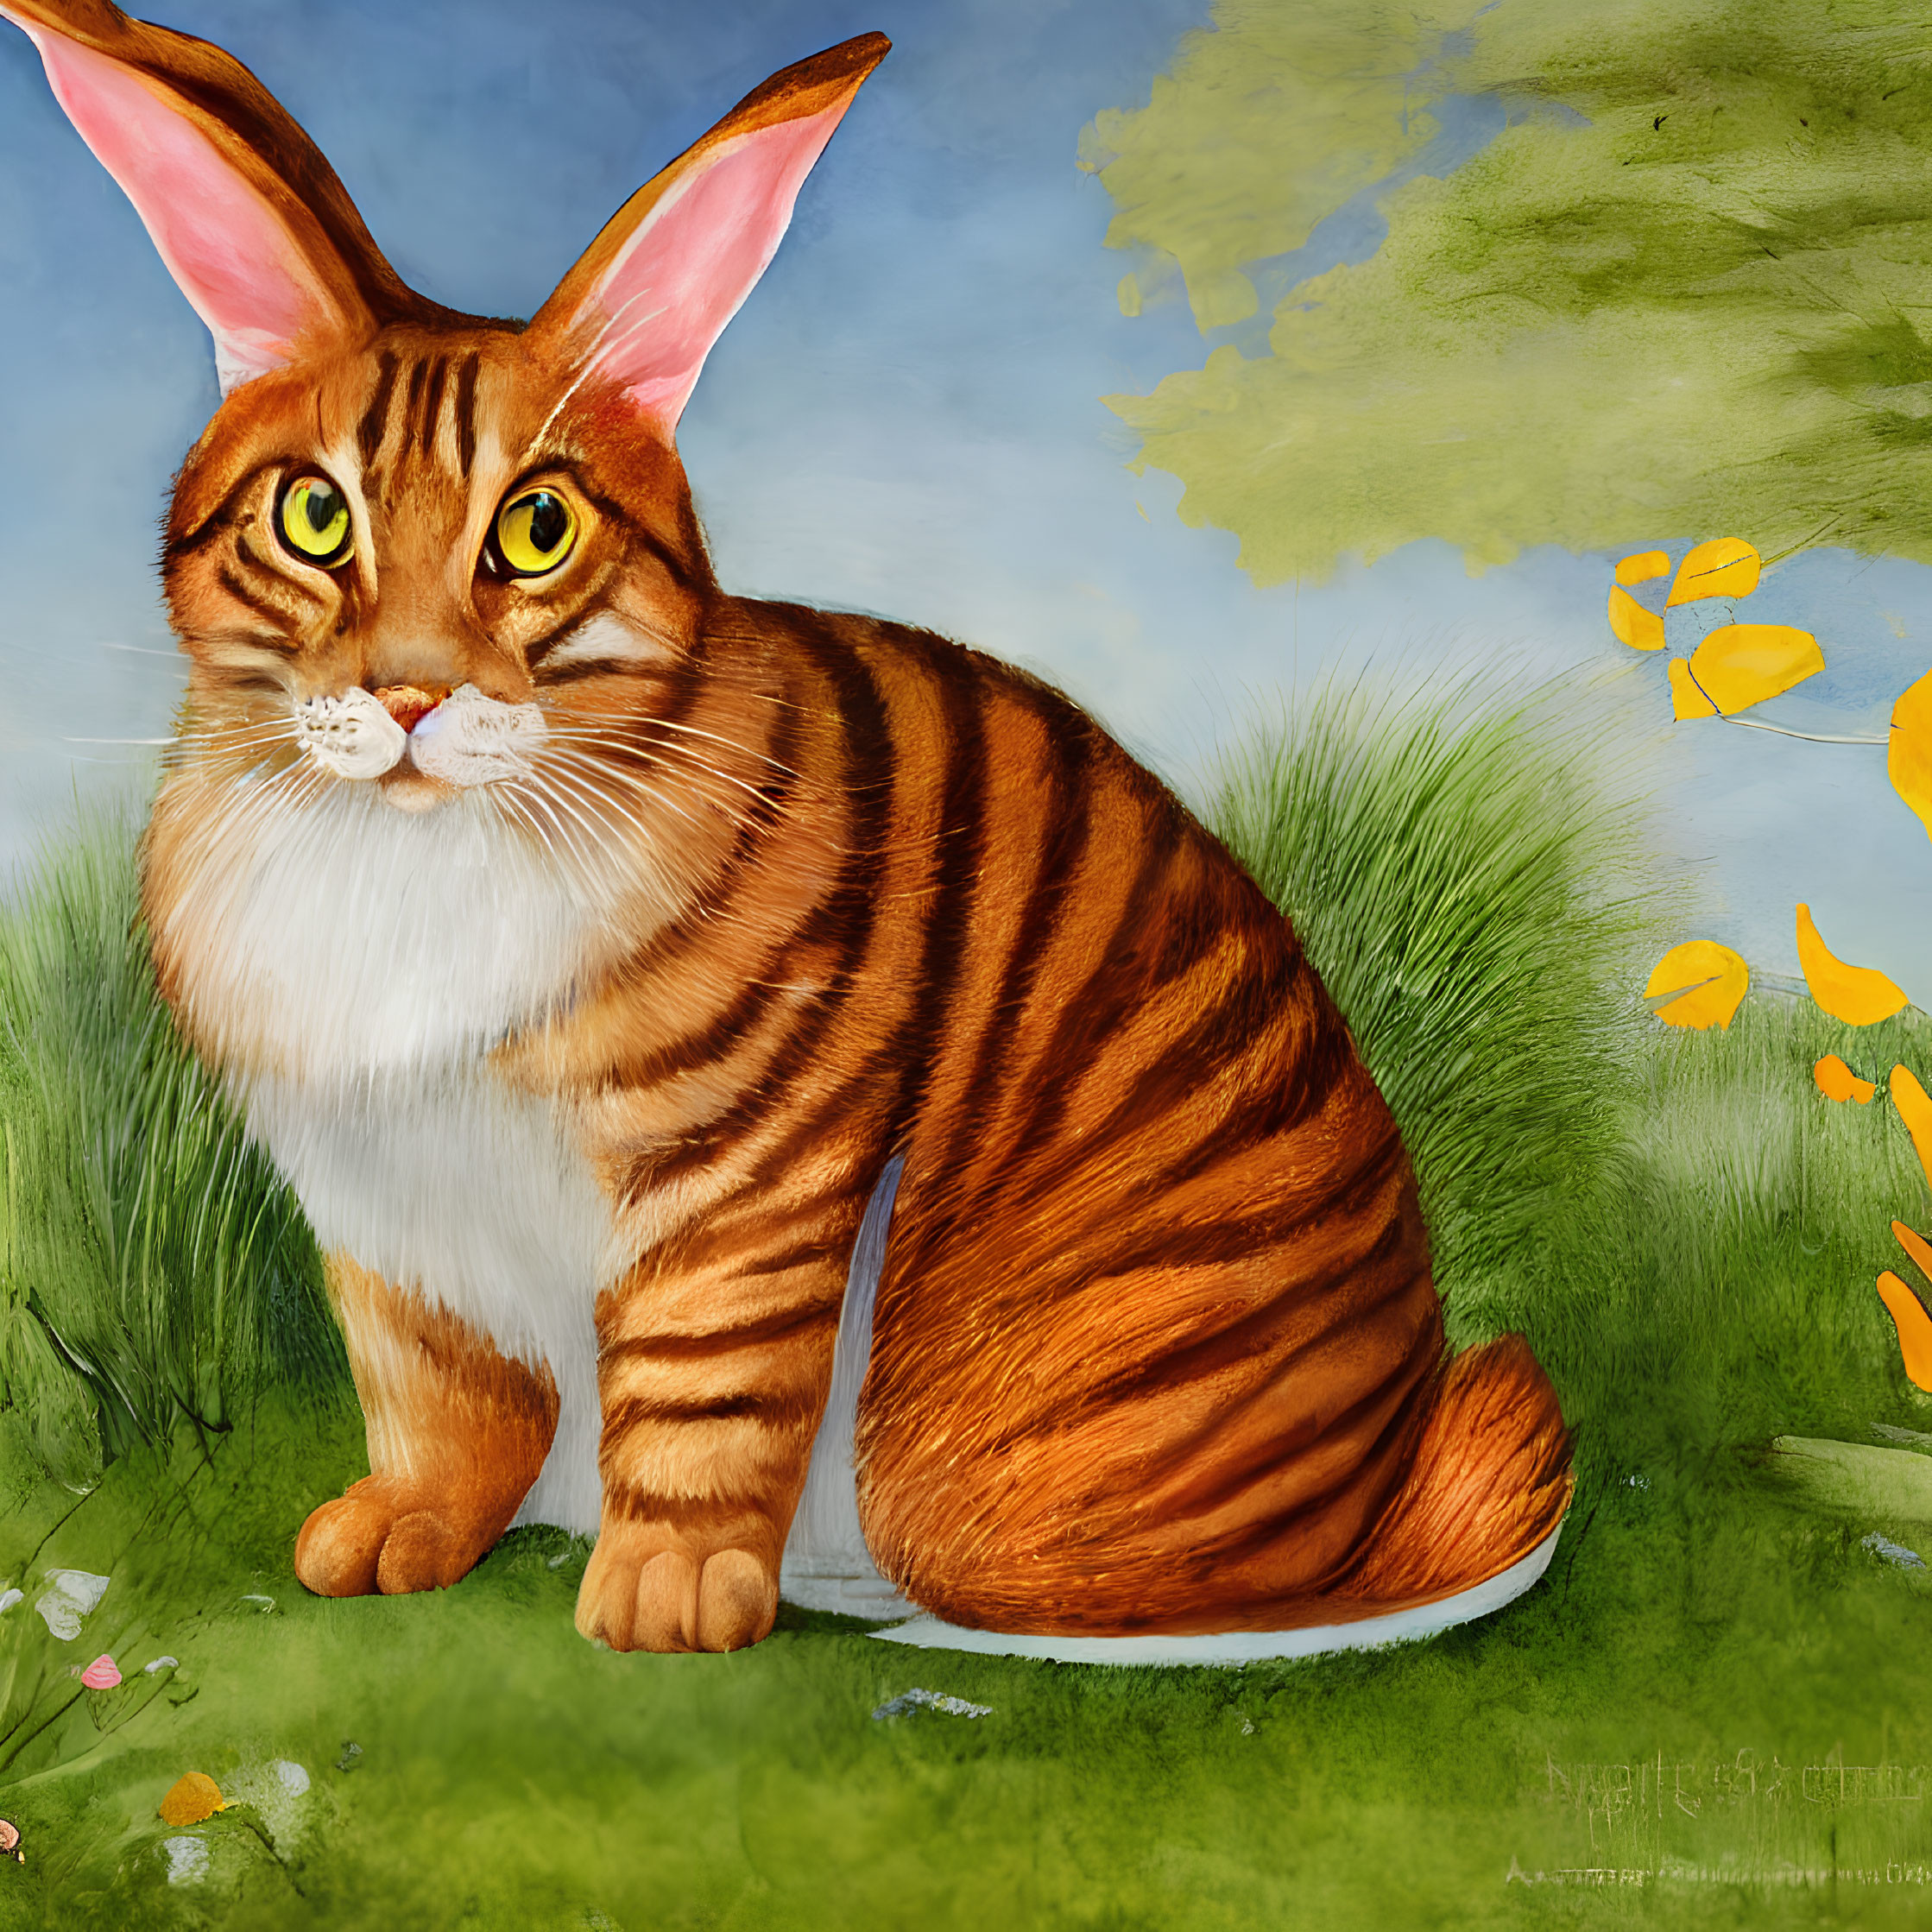 Hybrid Creature with Cat Body and Rabbit Ears in Grassy Field